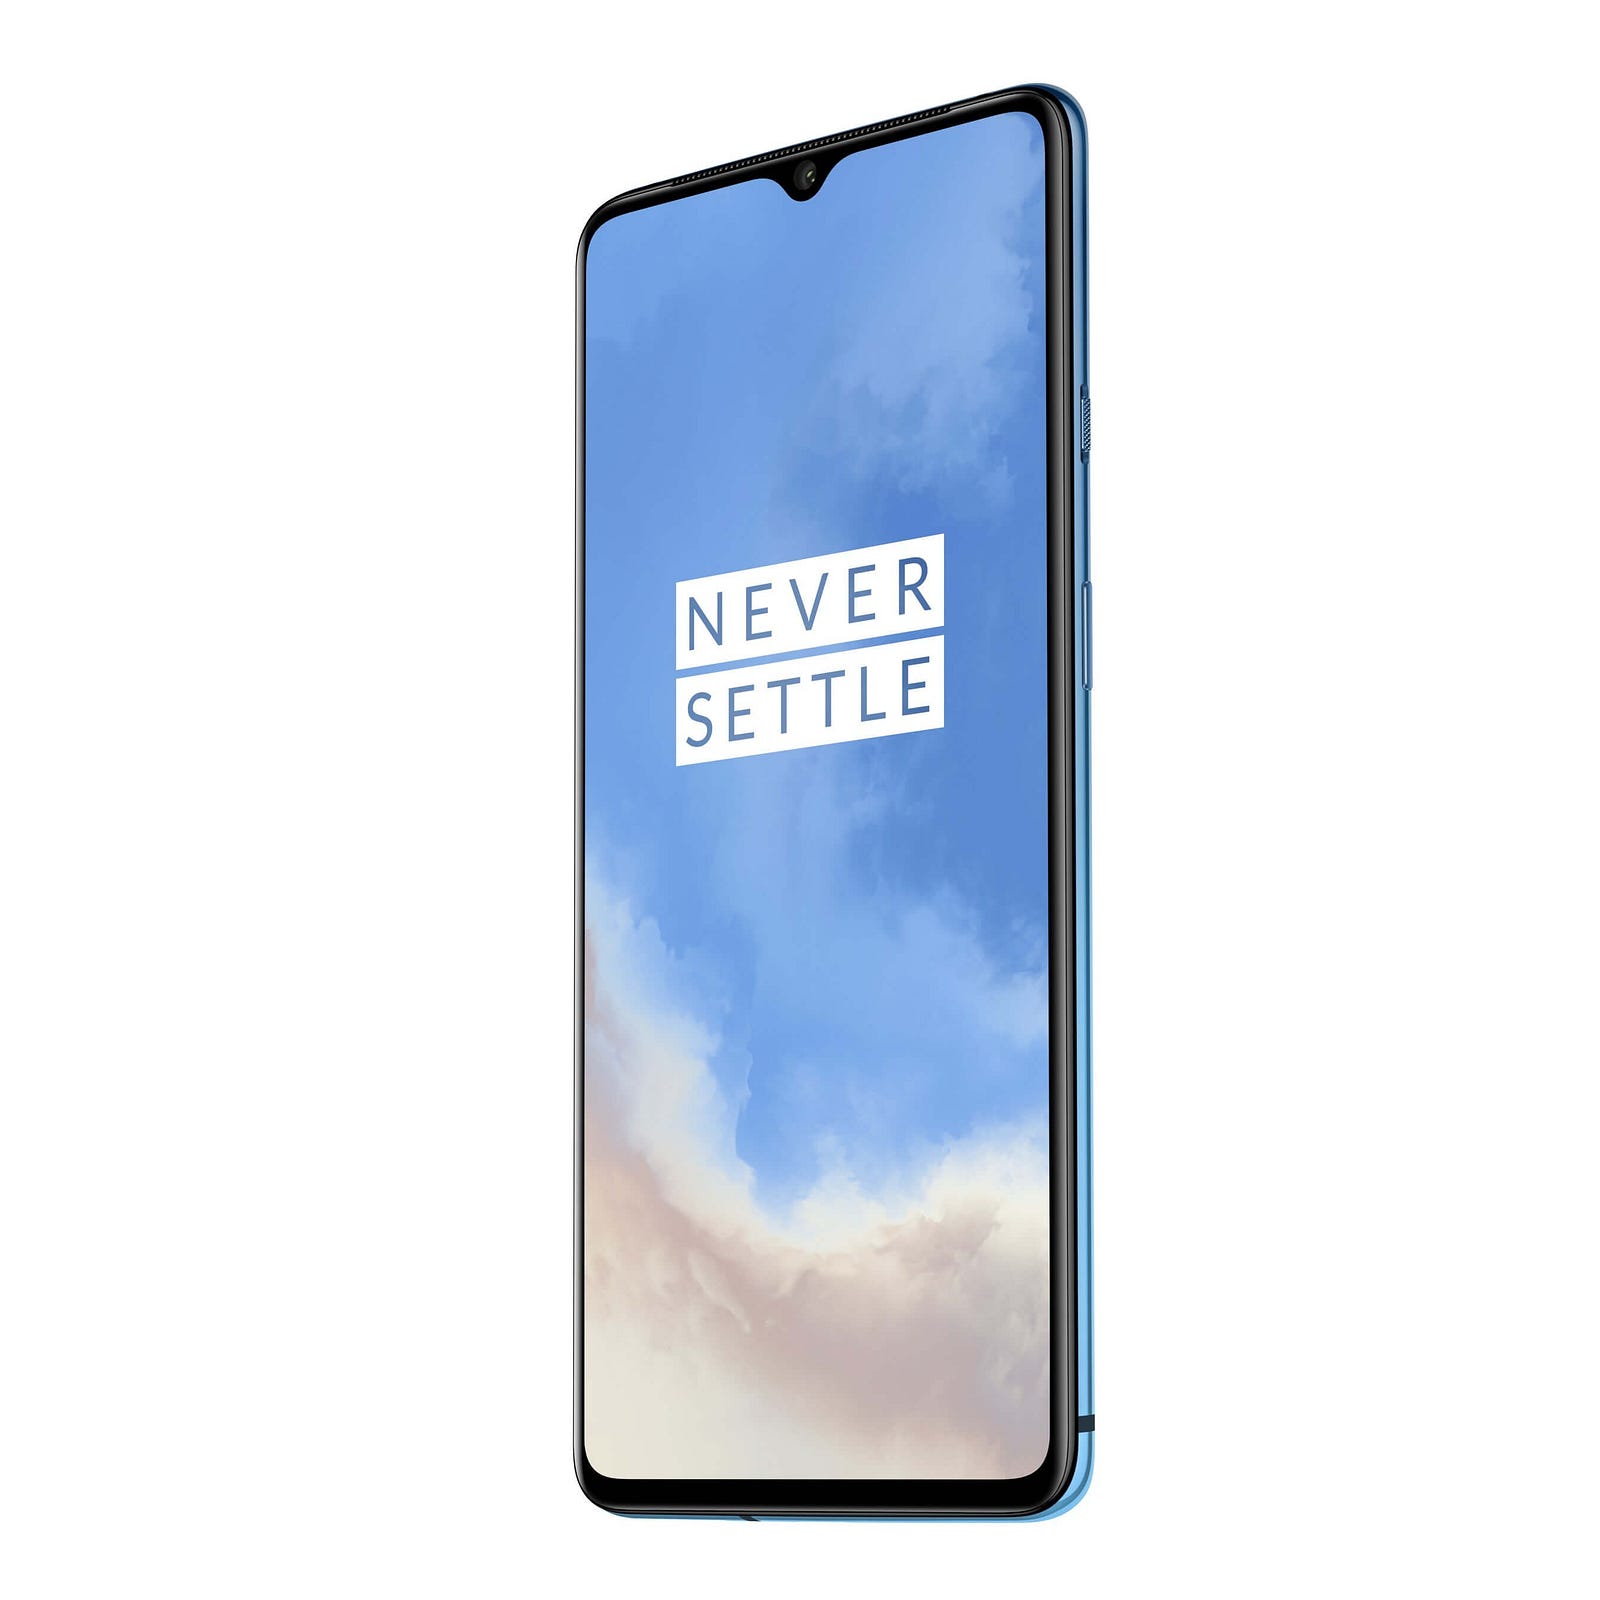 An image of a cell phone, the OnePlus 7T, with the words “Never Settle” on the screen against a cloudy background.